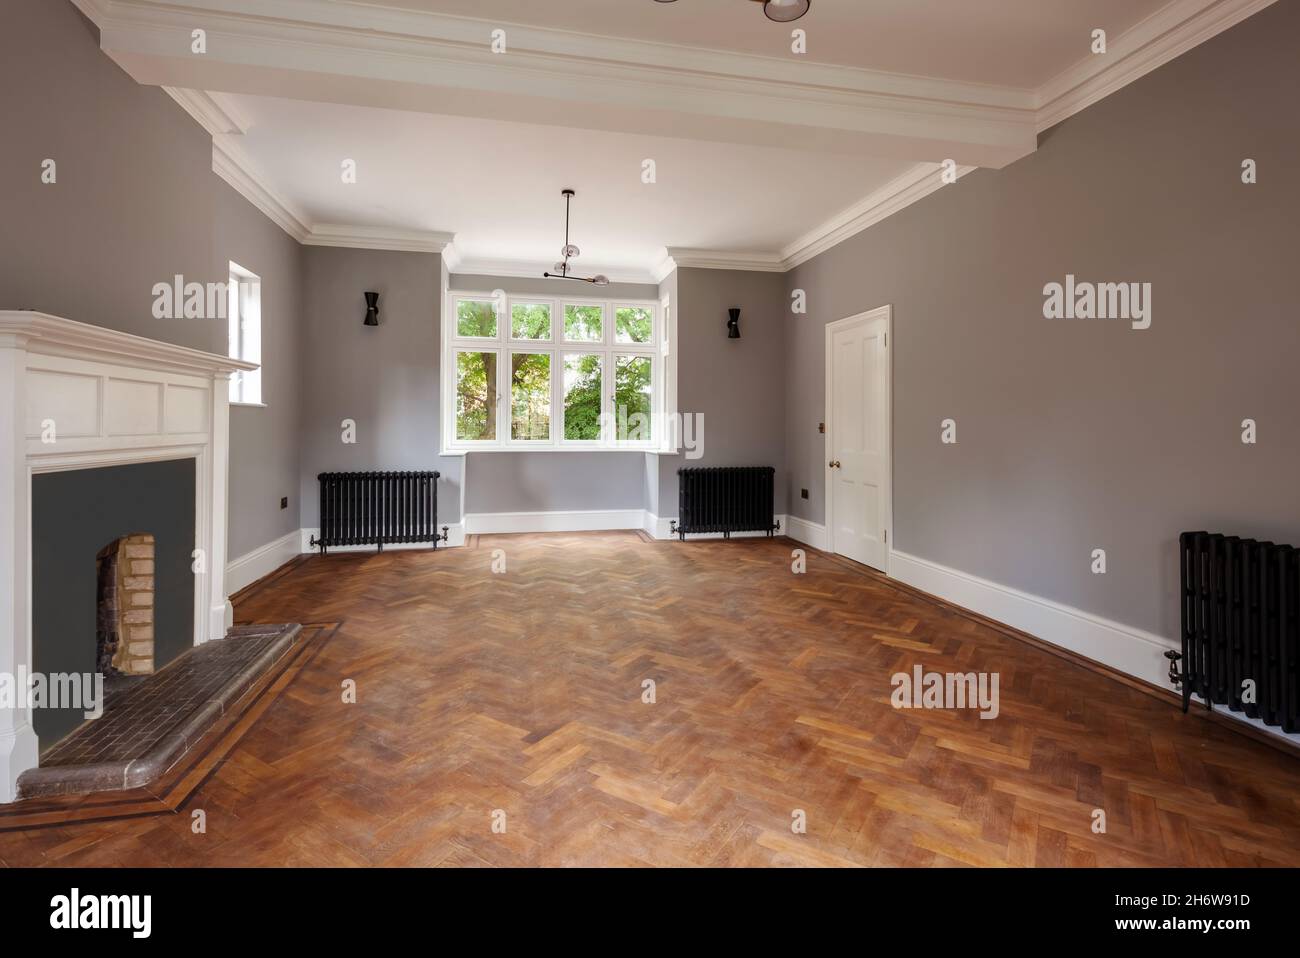 Wratting, England - August 19 2019: Empty traditional british living room renovated to retain original historical features including parquet floor Stock Photo